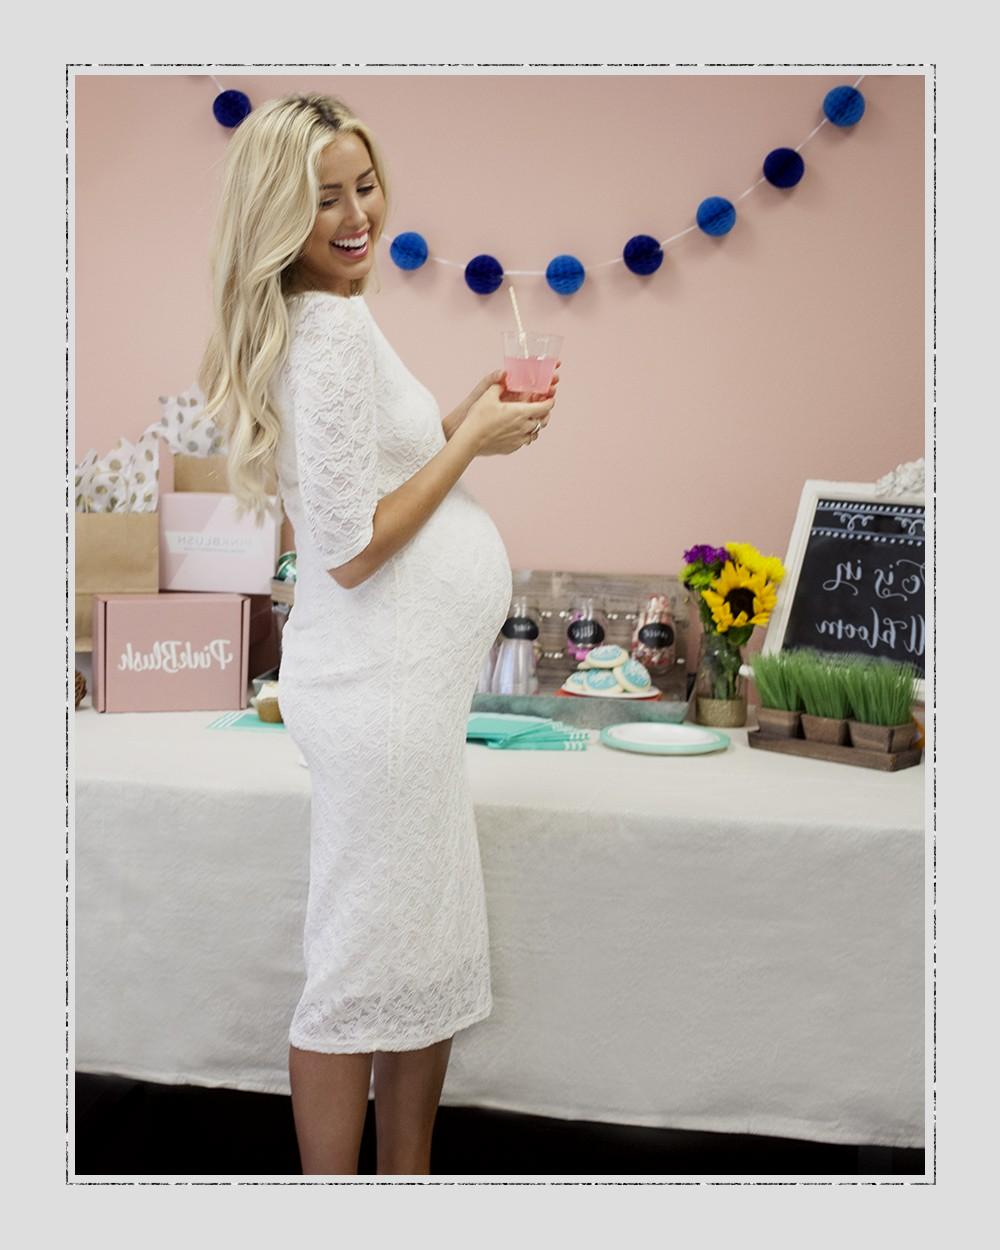 Full Size of Baby Shower:what To Wear To A Baby Shower In October Mom And Dad Baby Shower Outfits Petite Maternity Dresses For Baby Shower Maternity Blouses For Baby Shower Cute Baby Shower Outfits For Mom Maternity Maxi Dresses Maternity Dresses Maternity Gown Style